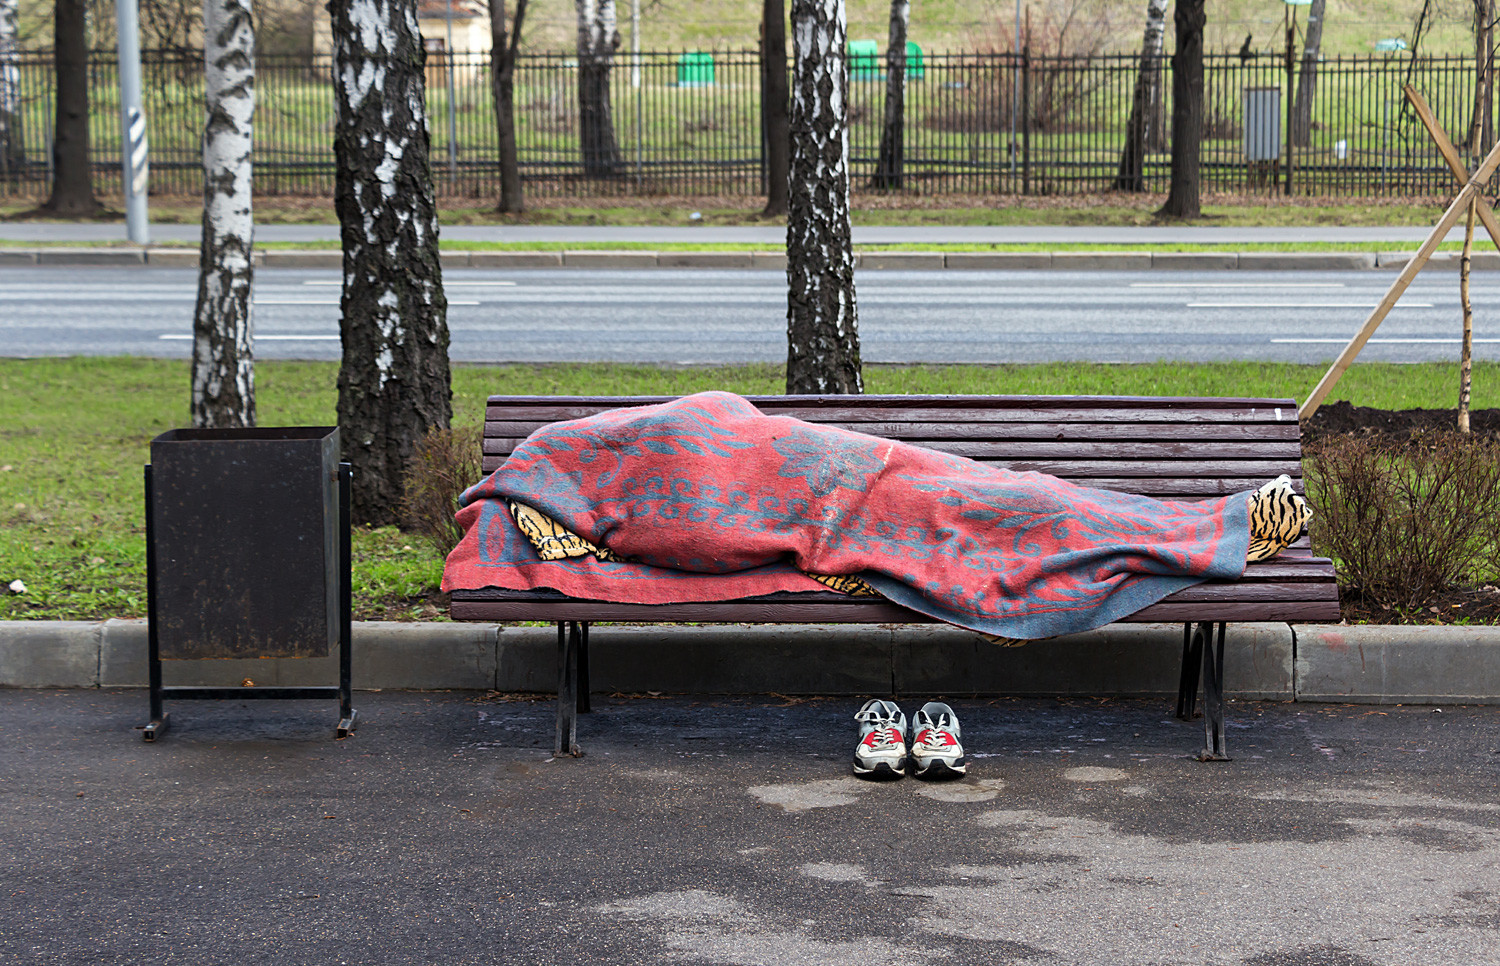 A homeless person sleeping on a bench near Sparrow Hills, Moscow.